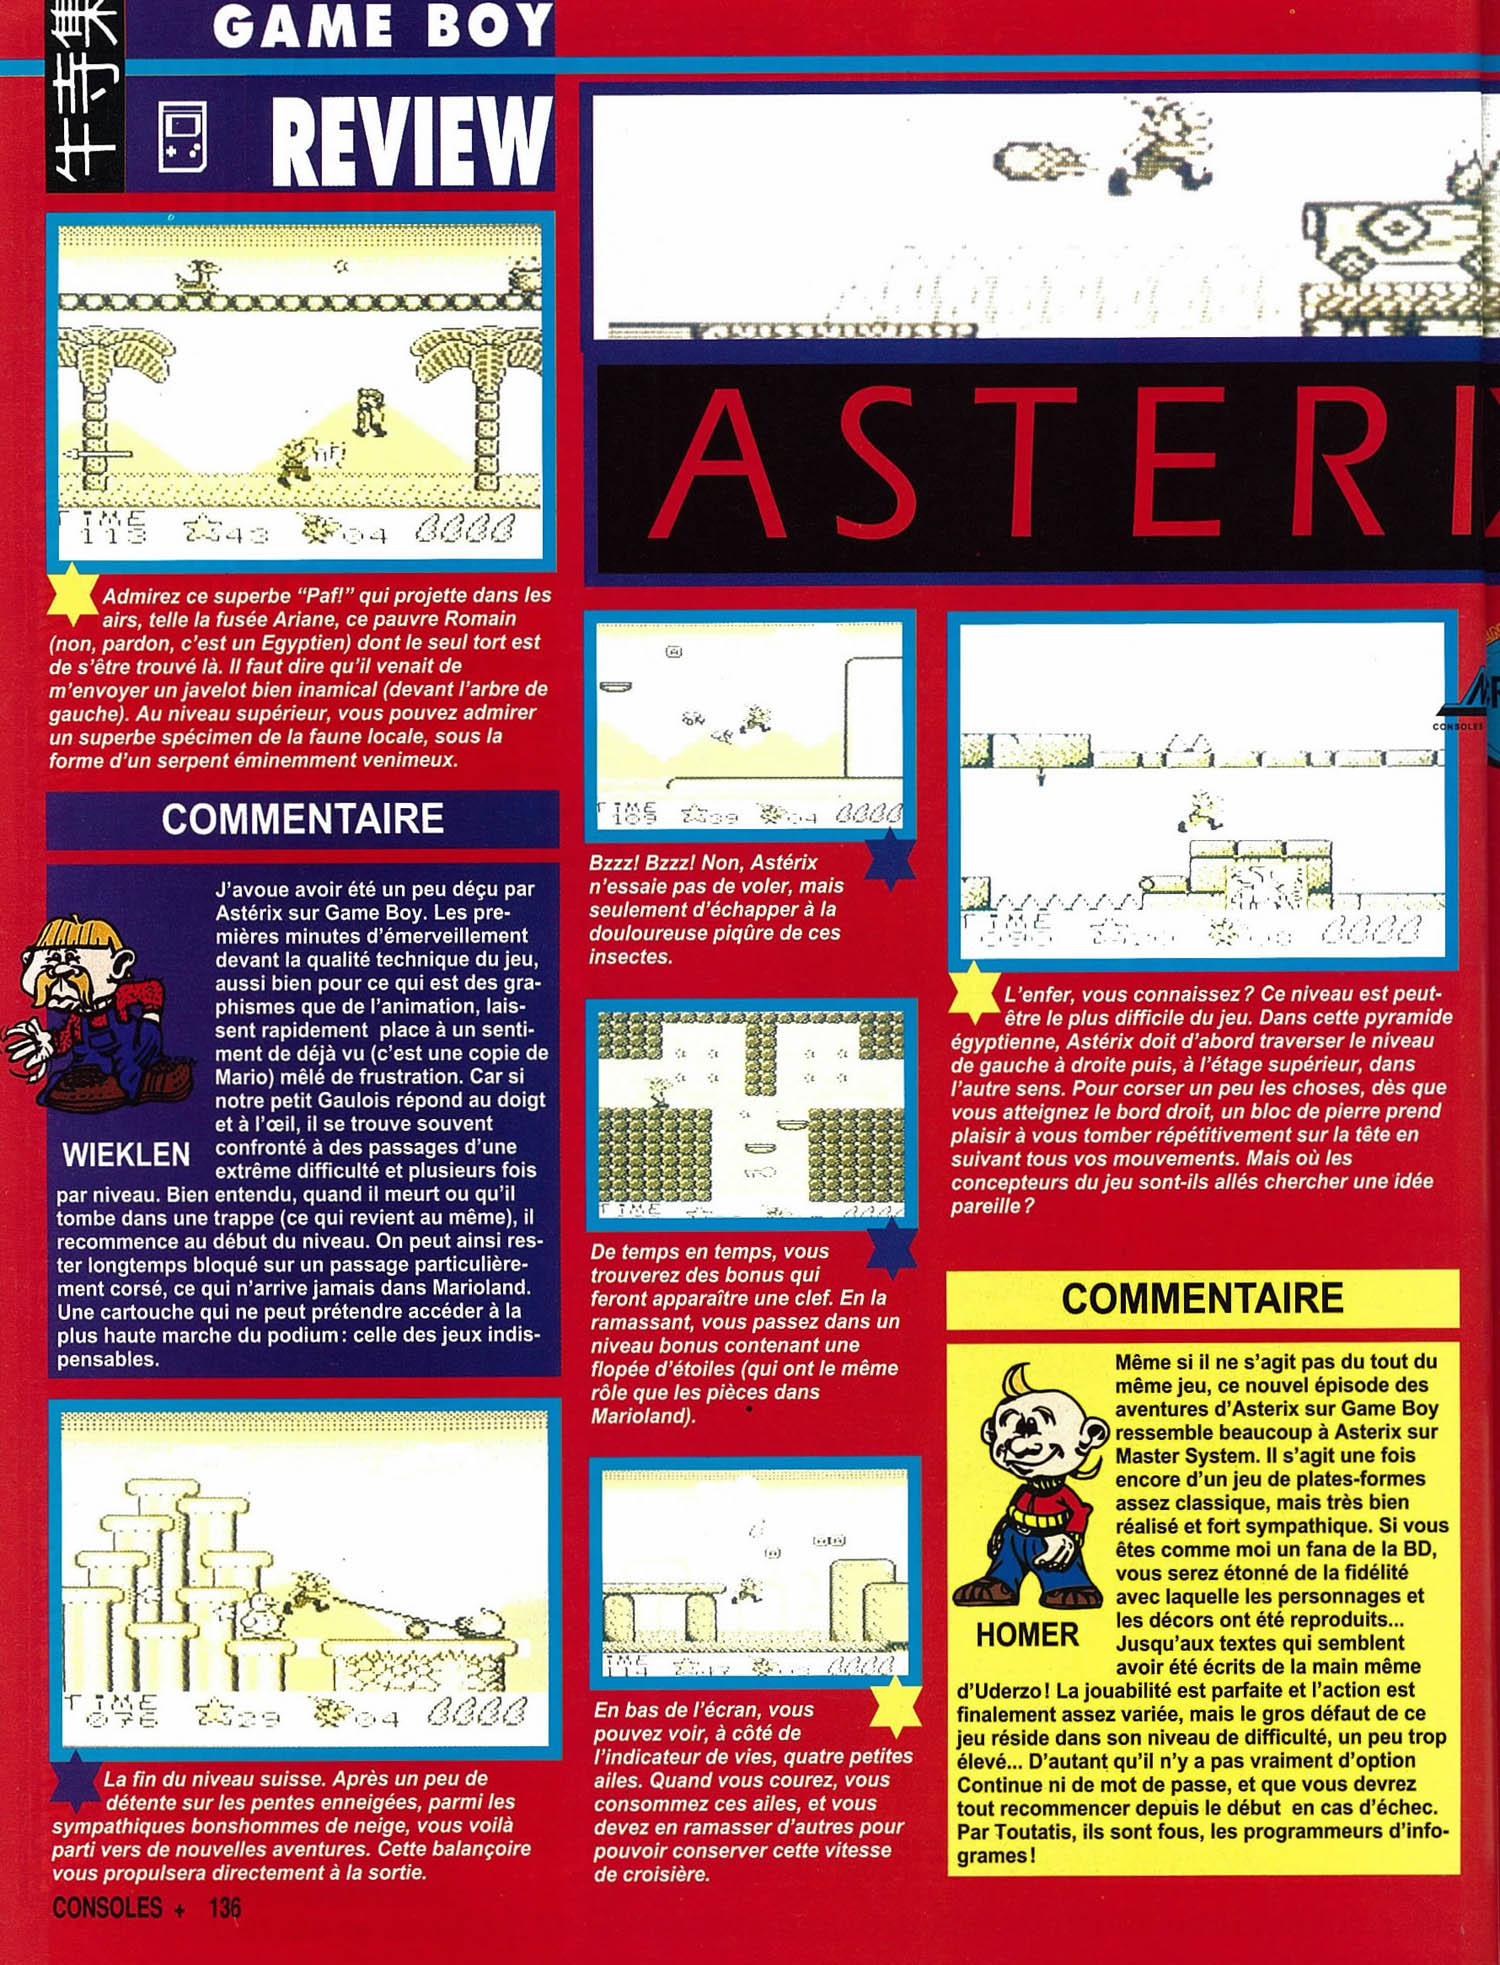 tests//1377/Consoles + 021 - Page 136 (juin 1993).jpg